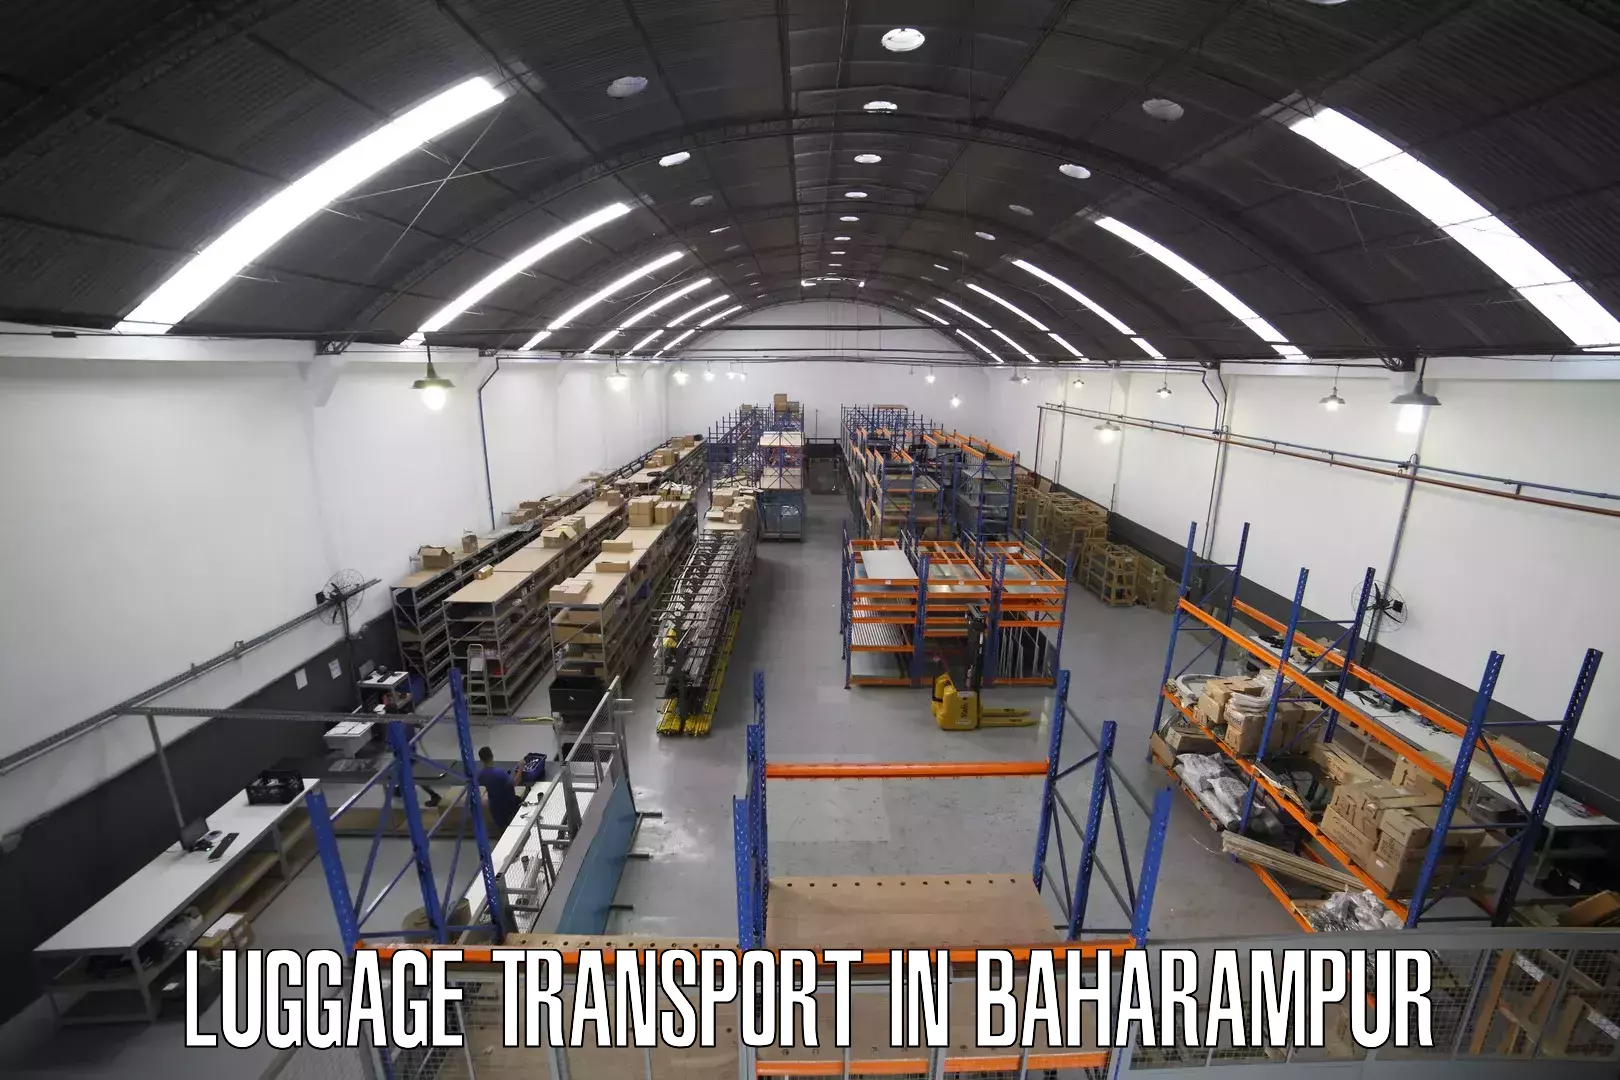 Heavy luggage shipping in Baharampur